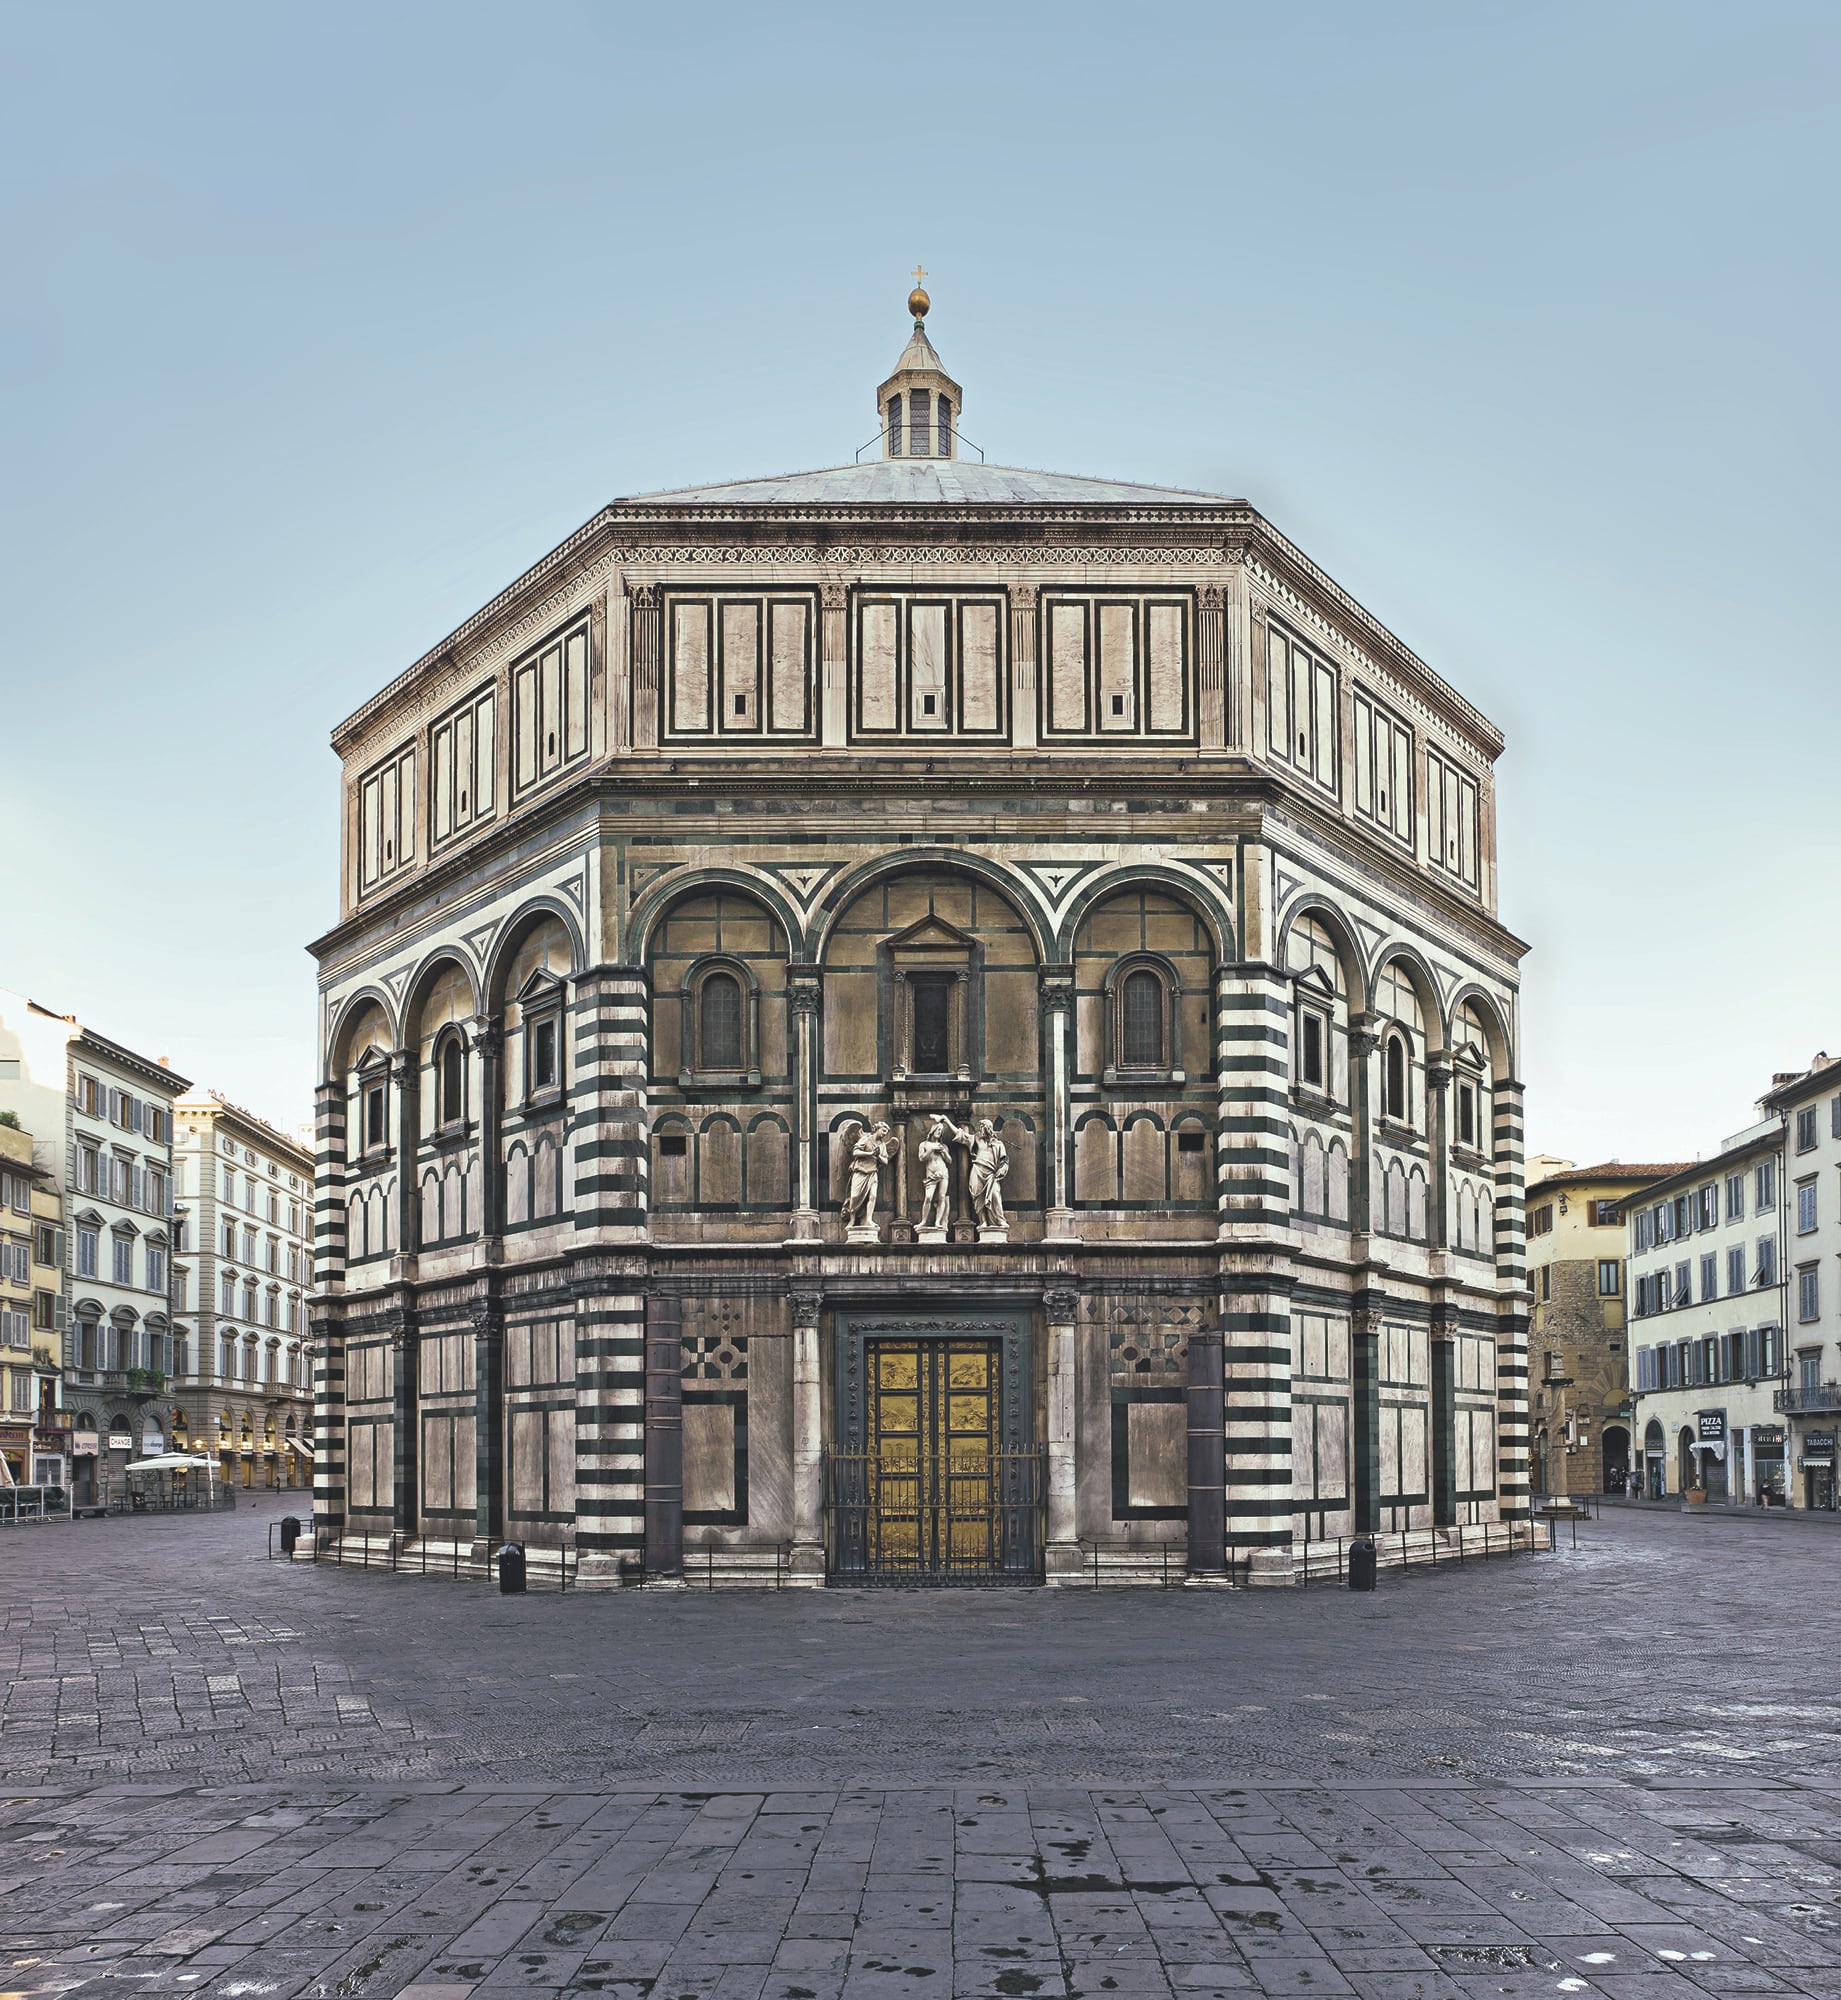 The Baptistery of Florence, with reproductions of the doors (the originals are kept in the Duomo Museum)